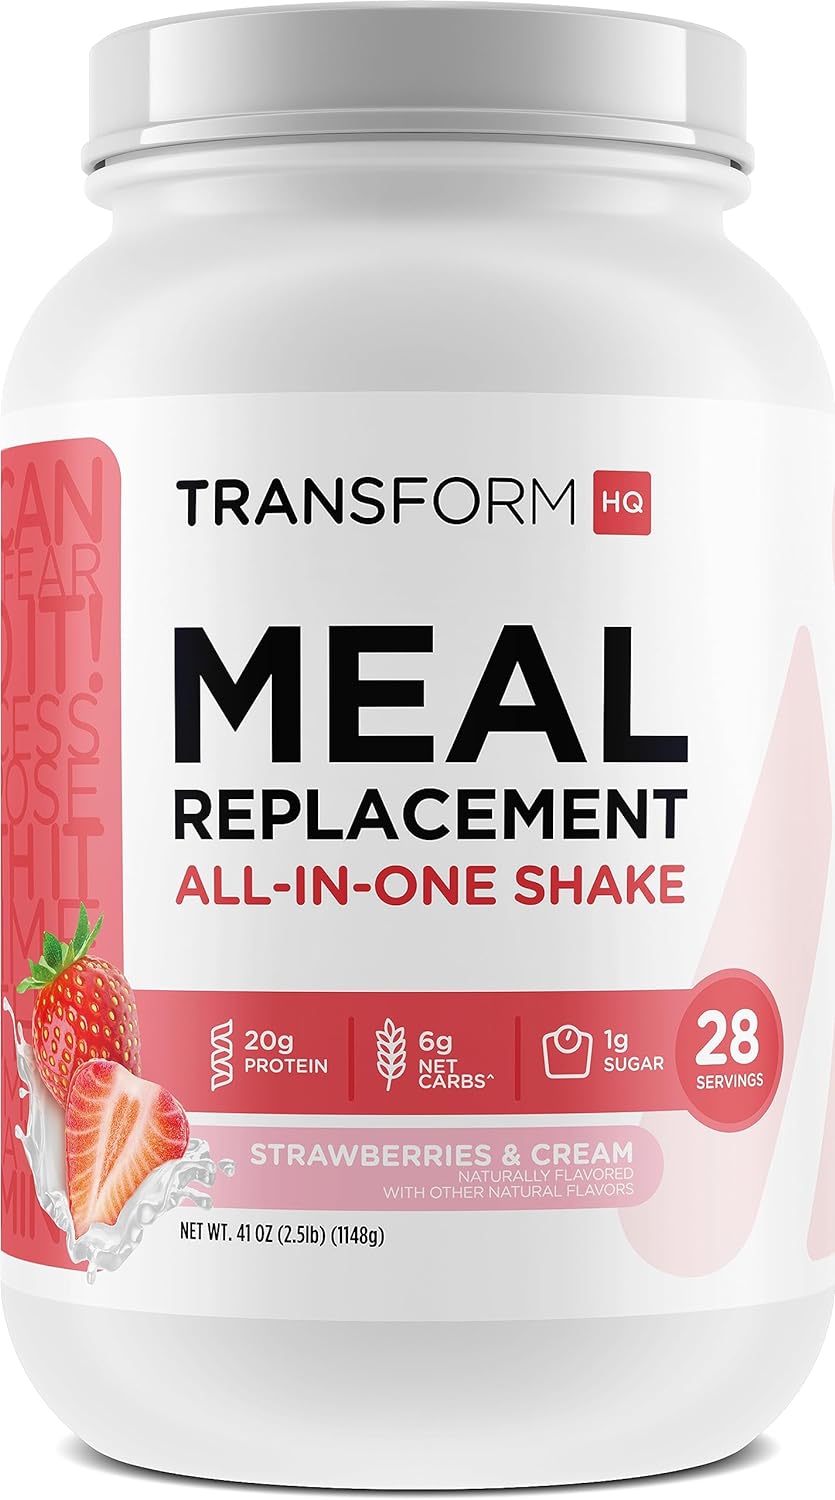 TransformHQ Meal Replacement Shake Powder 28 Servings (Strawberry & Cr